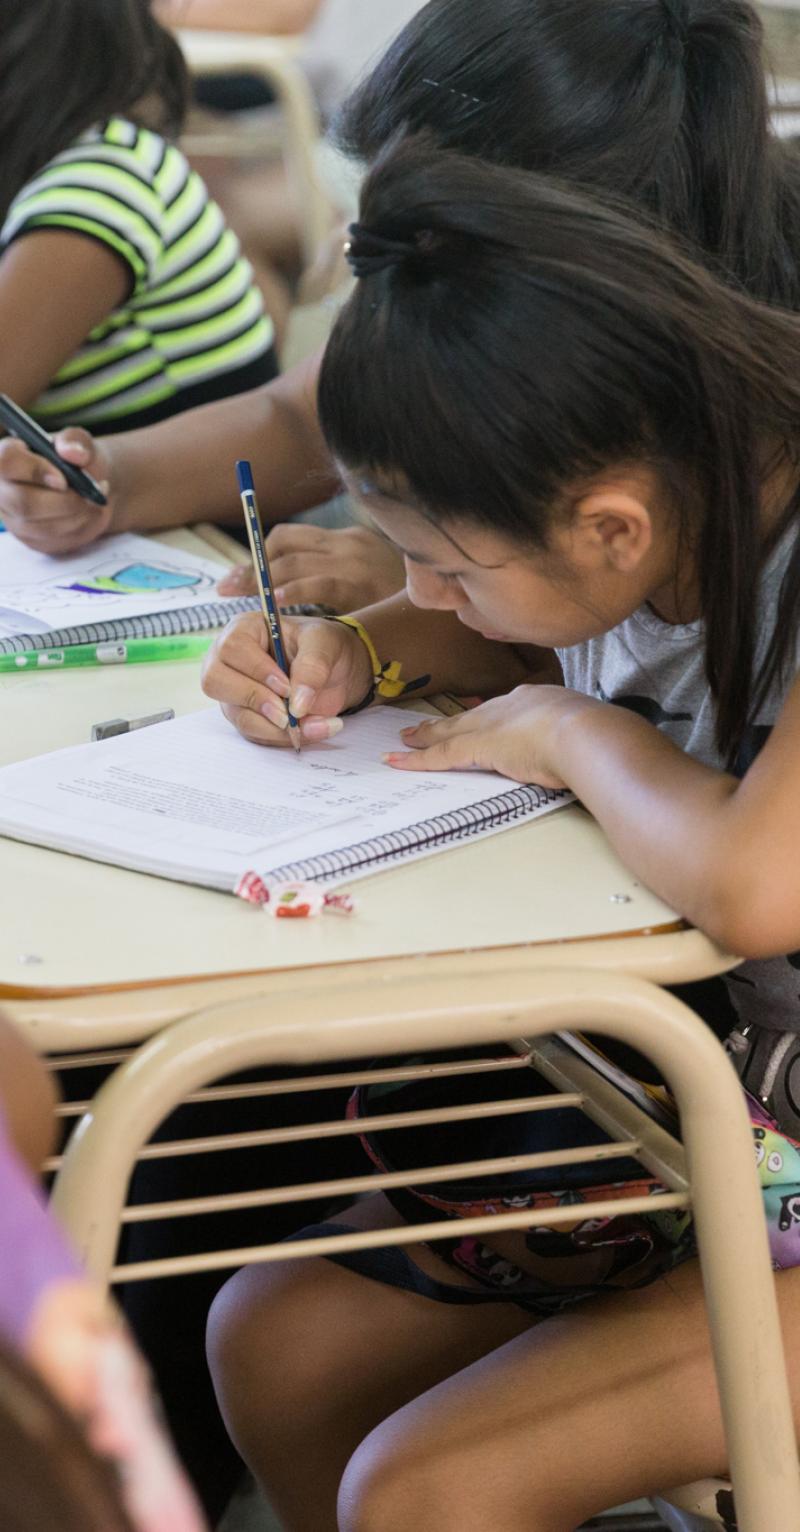 A young teen girl with a high ponytail writes in a notebook on her desk surrounded by classmates working at their desks